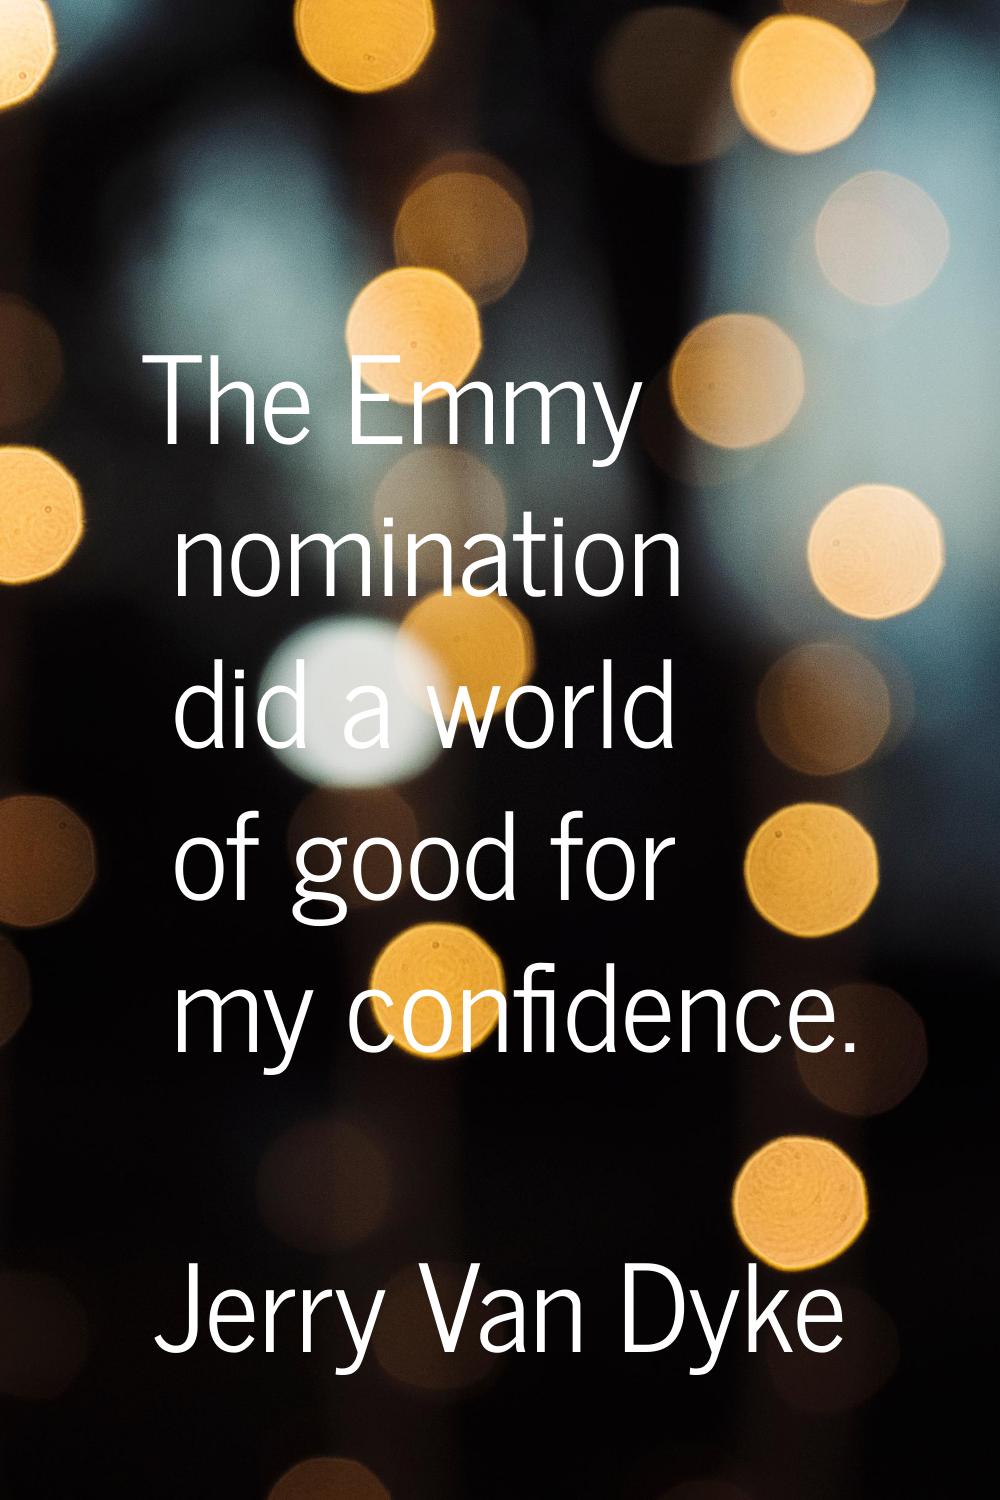 The Emmy nomination did a world of good for my confidence.